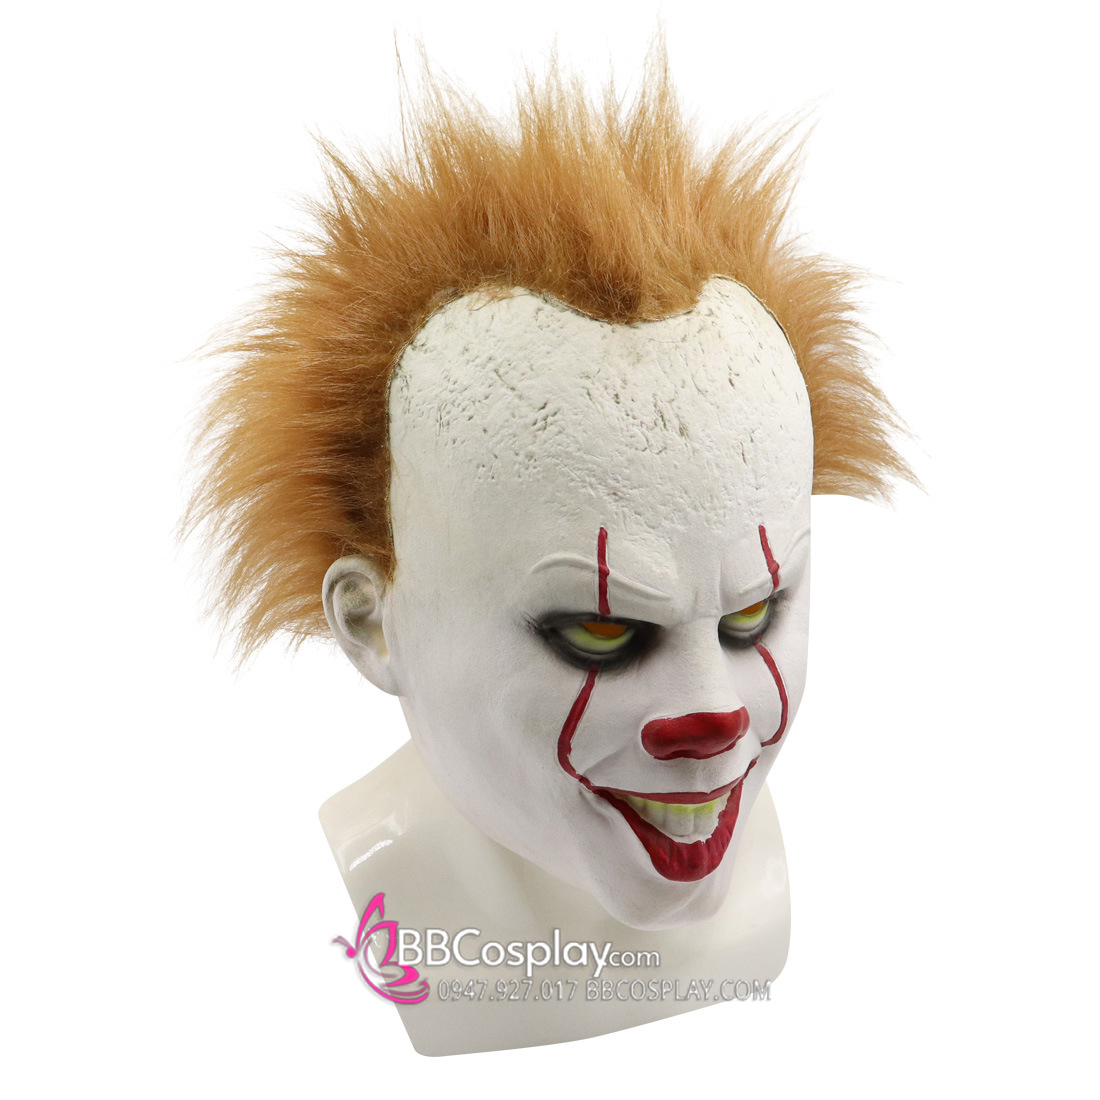 Mặt Nạ Pennywise